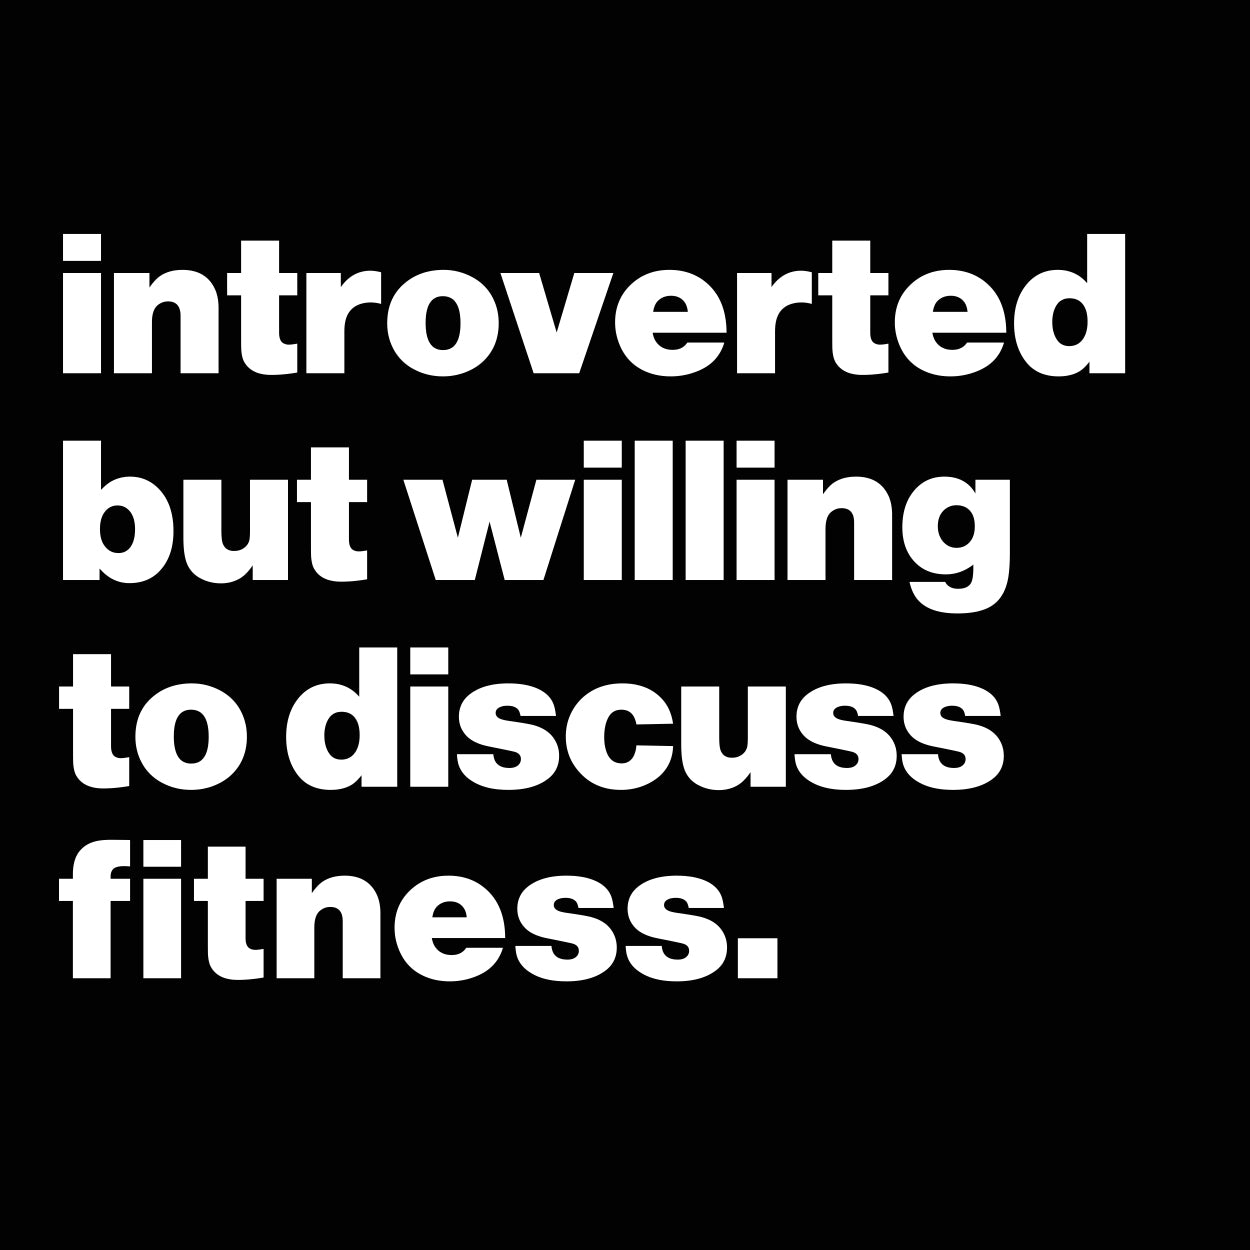 Introverted But Willing To Discuss Fitness Tshirt - Donkey Tees